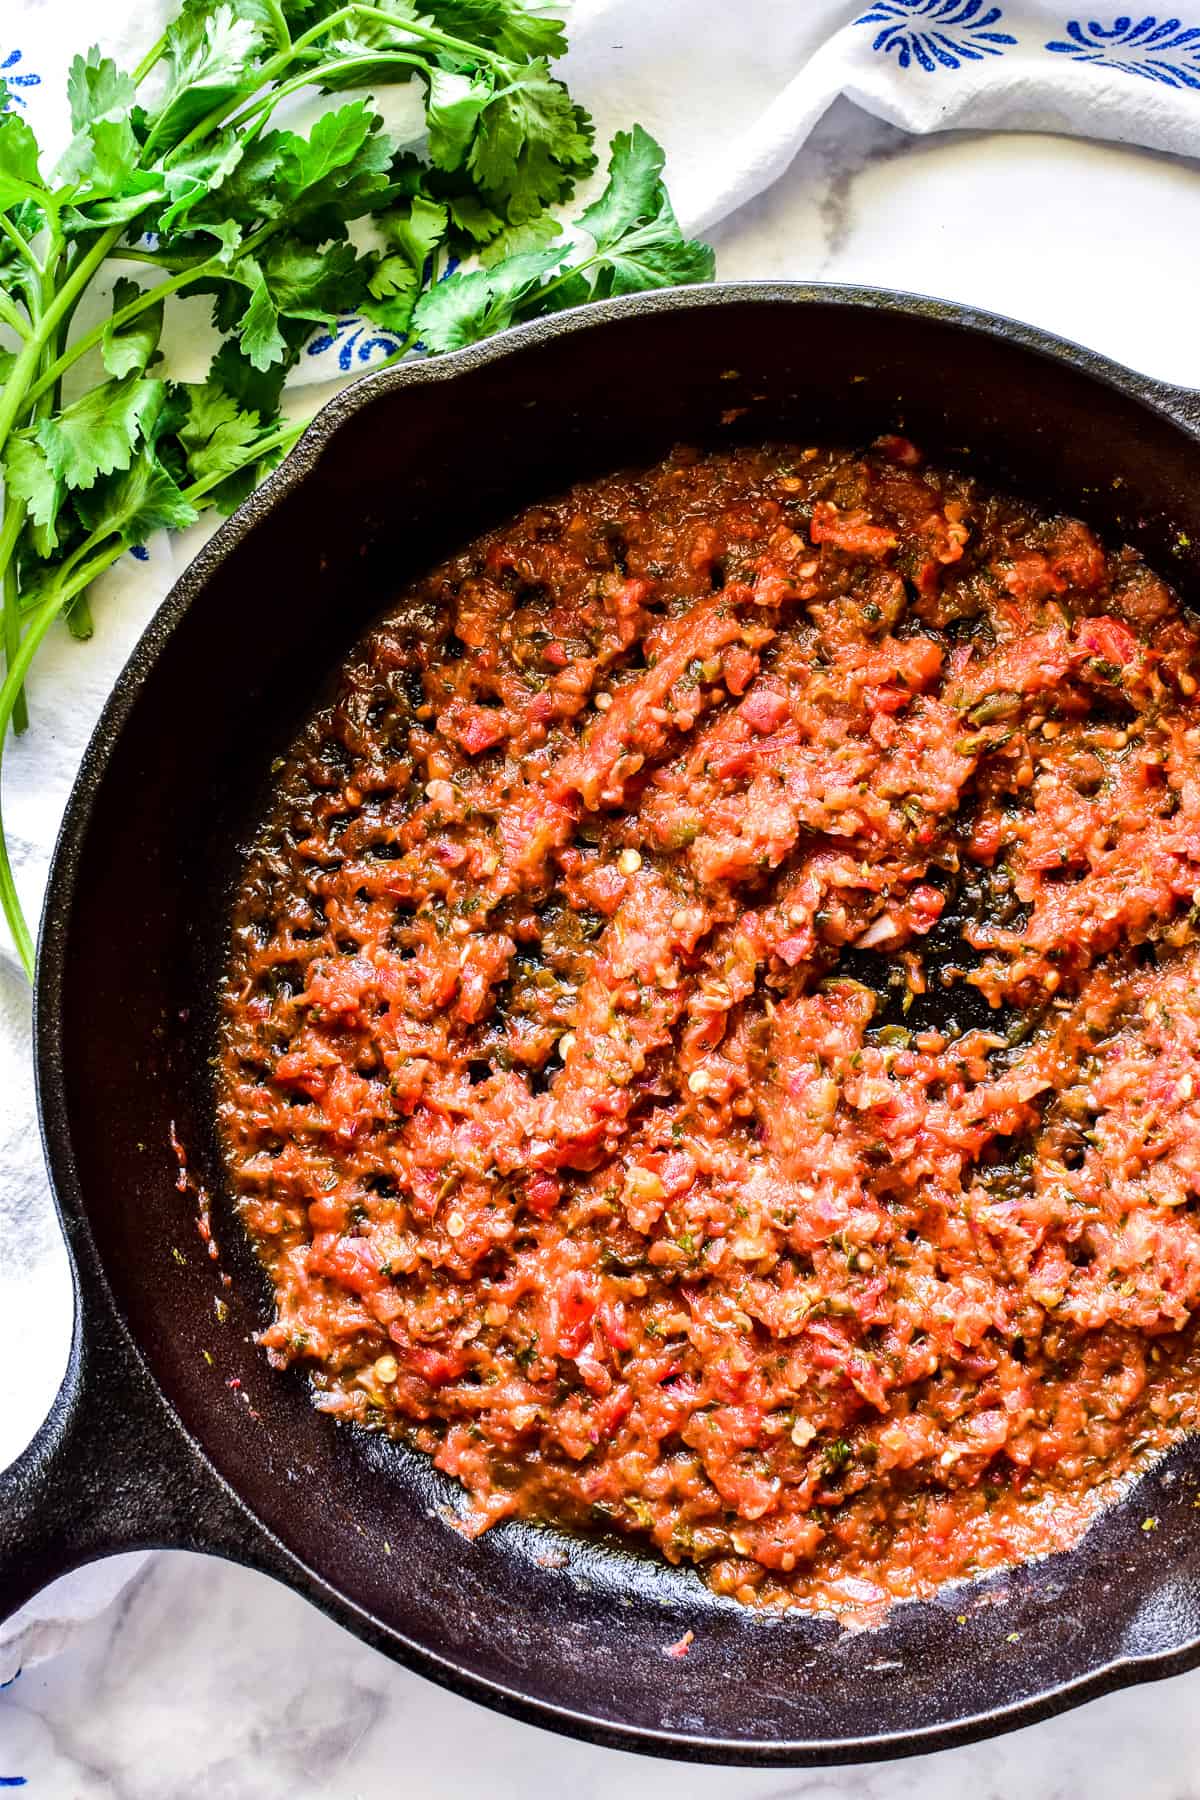 Cooked salsa in a black cast iron skillet